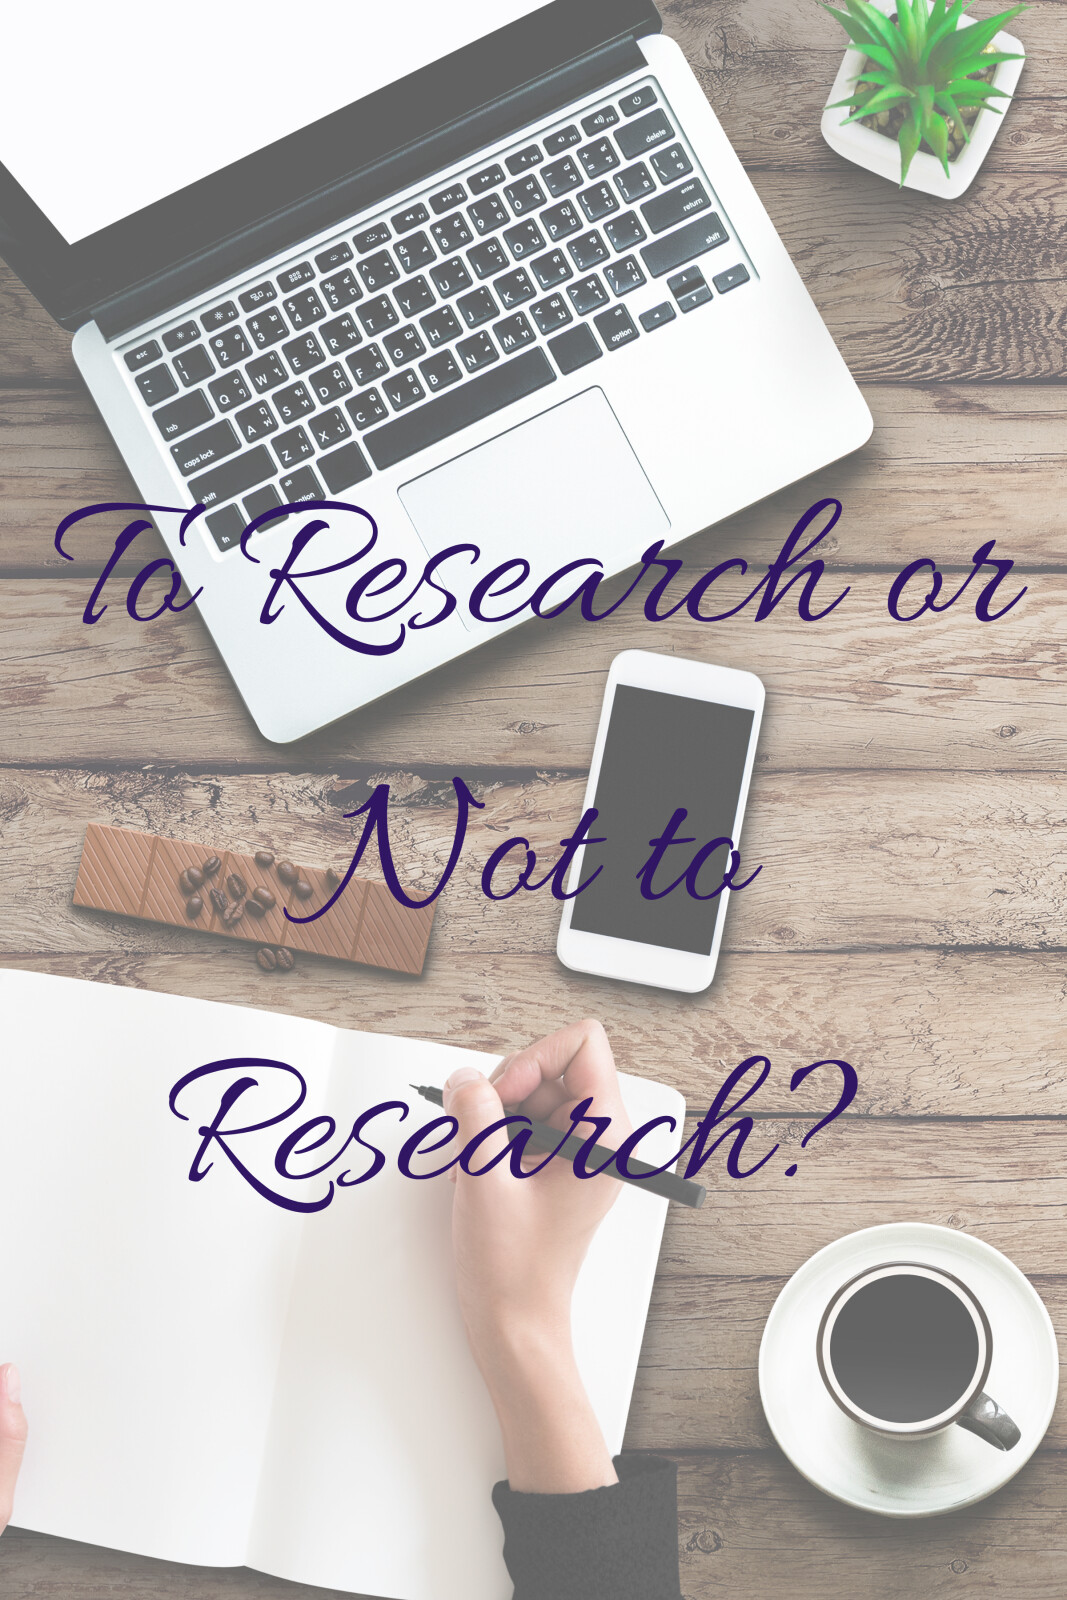 To research or not to research?